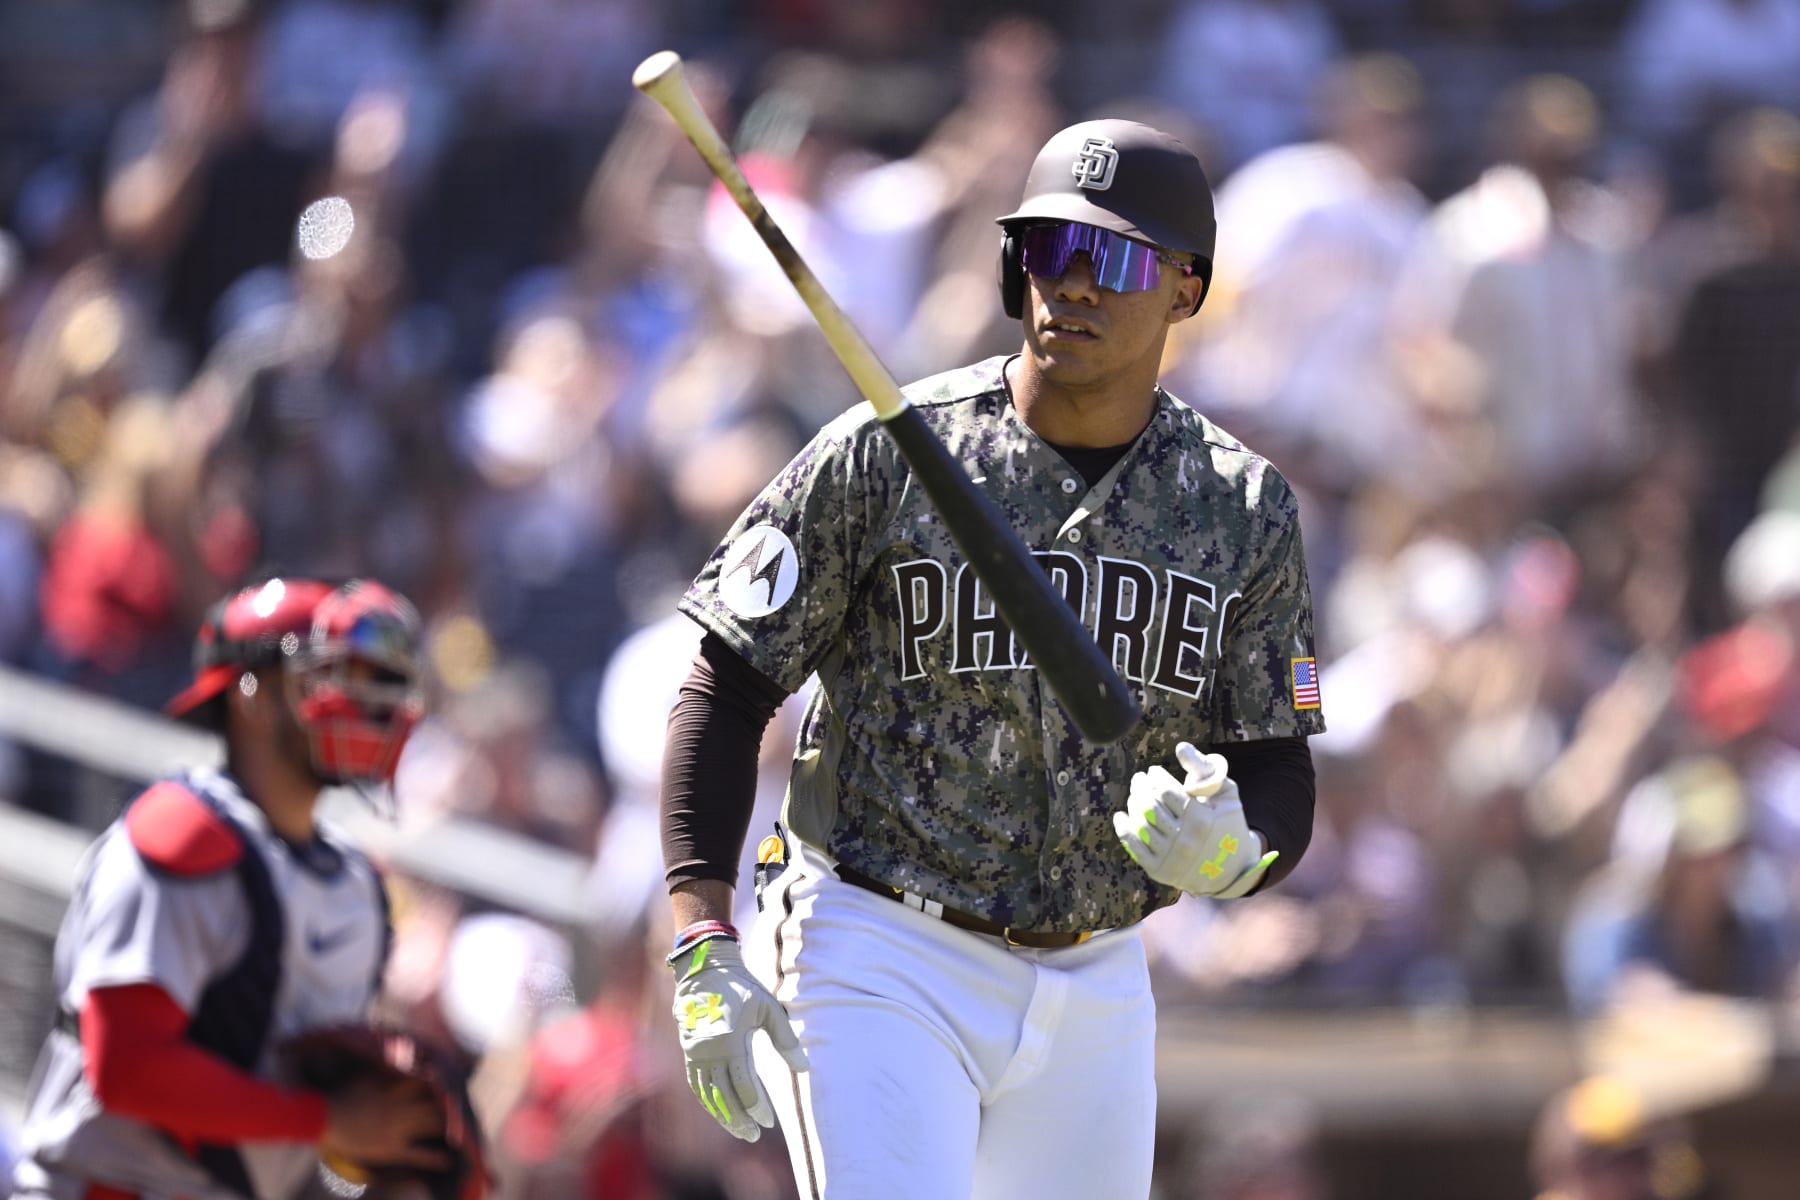 This Chicago White Sox player is likely the best trade chip